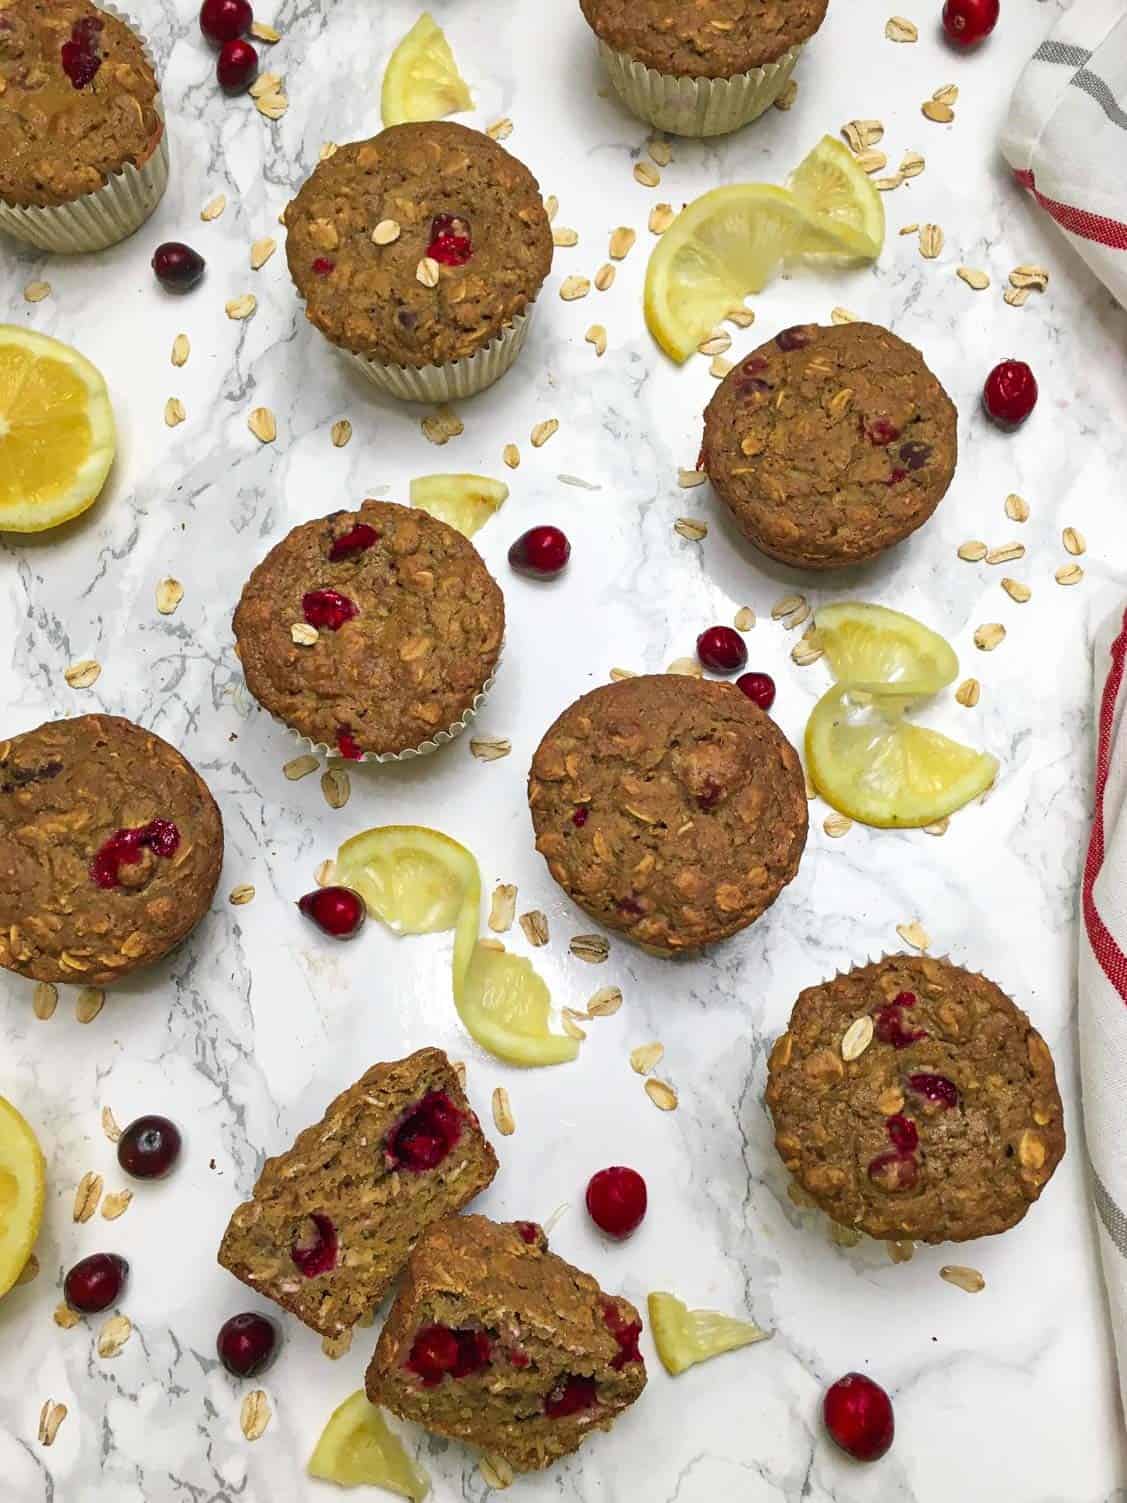 Overhead view of cranberry muffins with cranberries, oats and lemon slices scattered around.